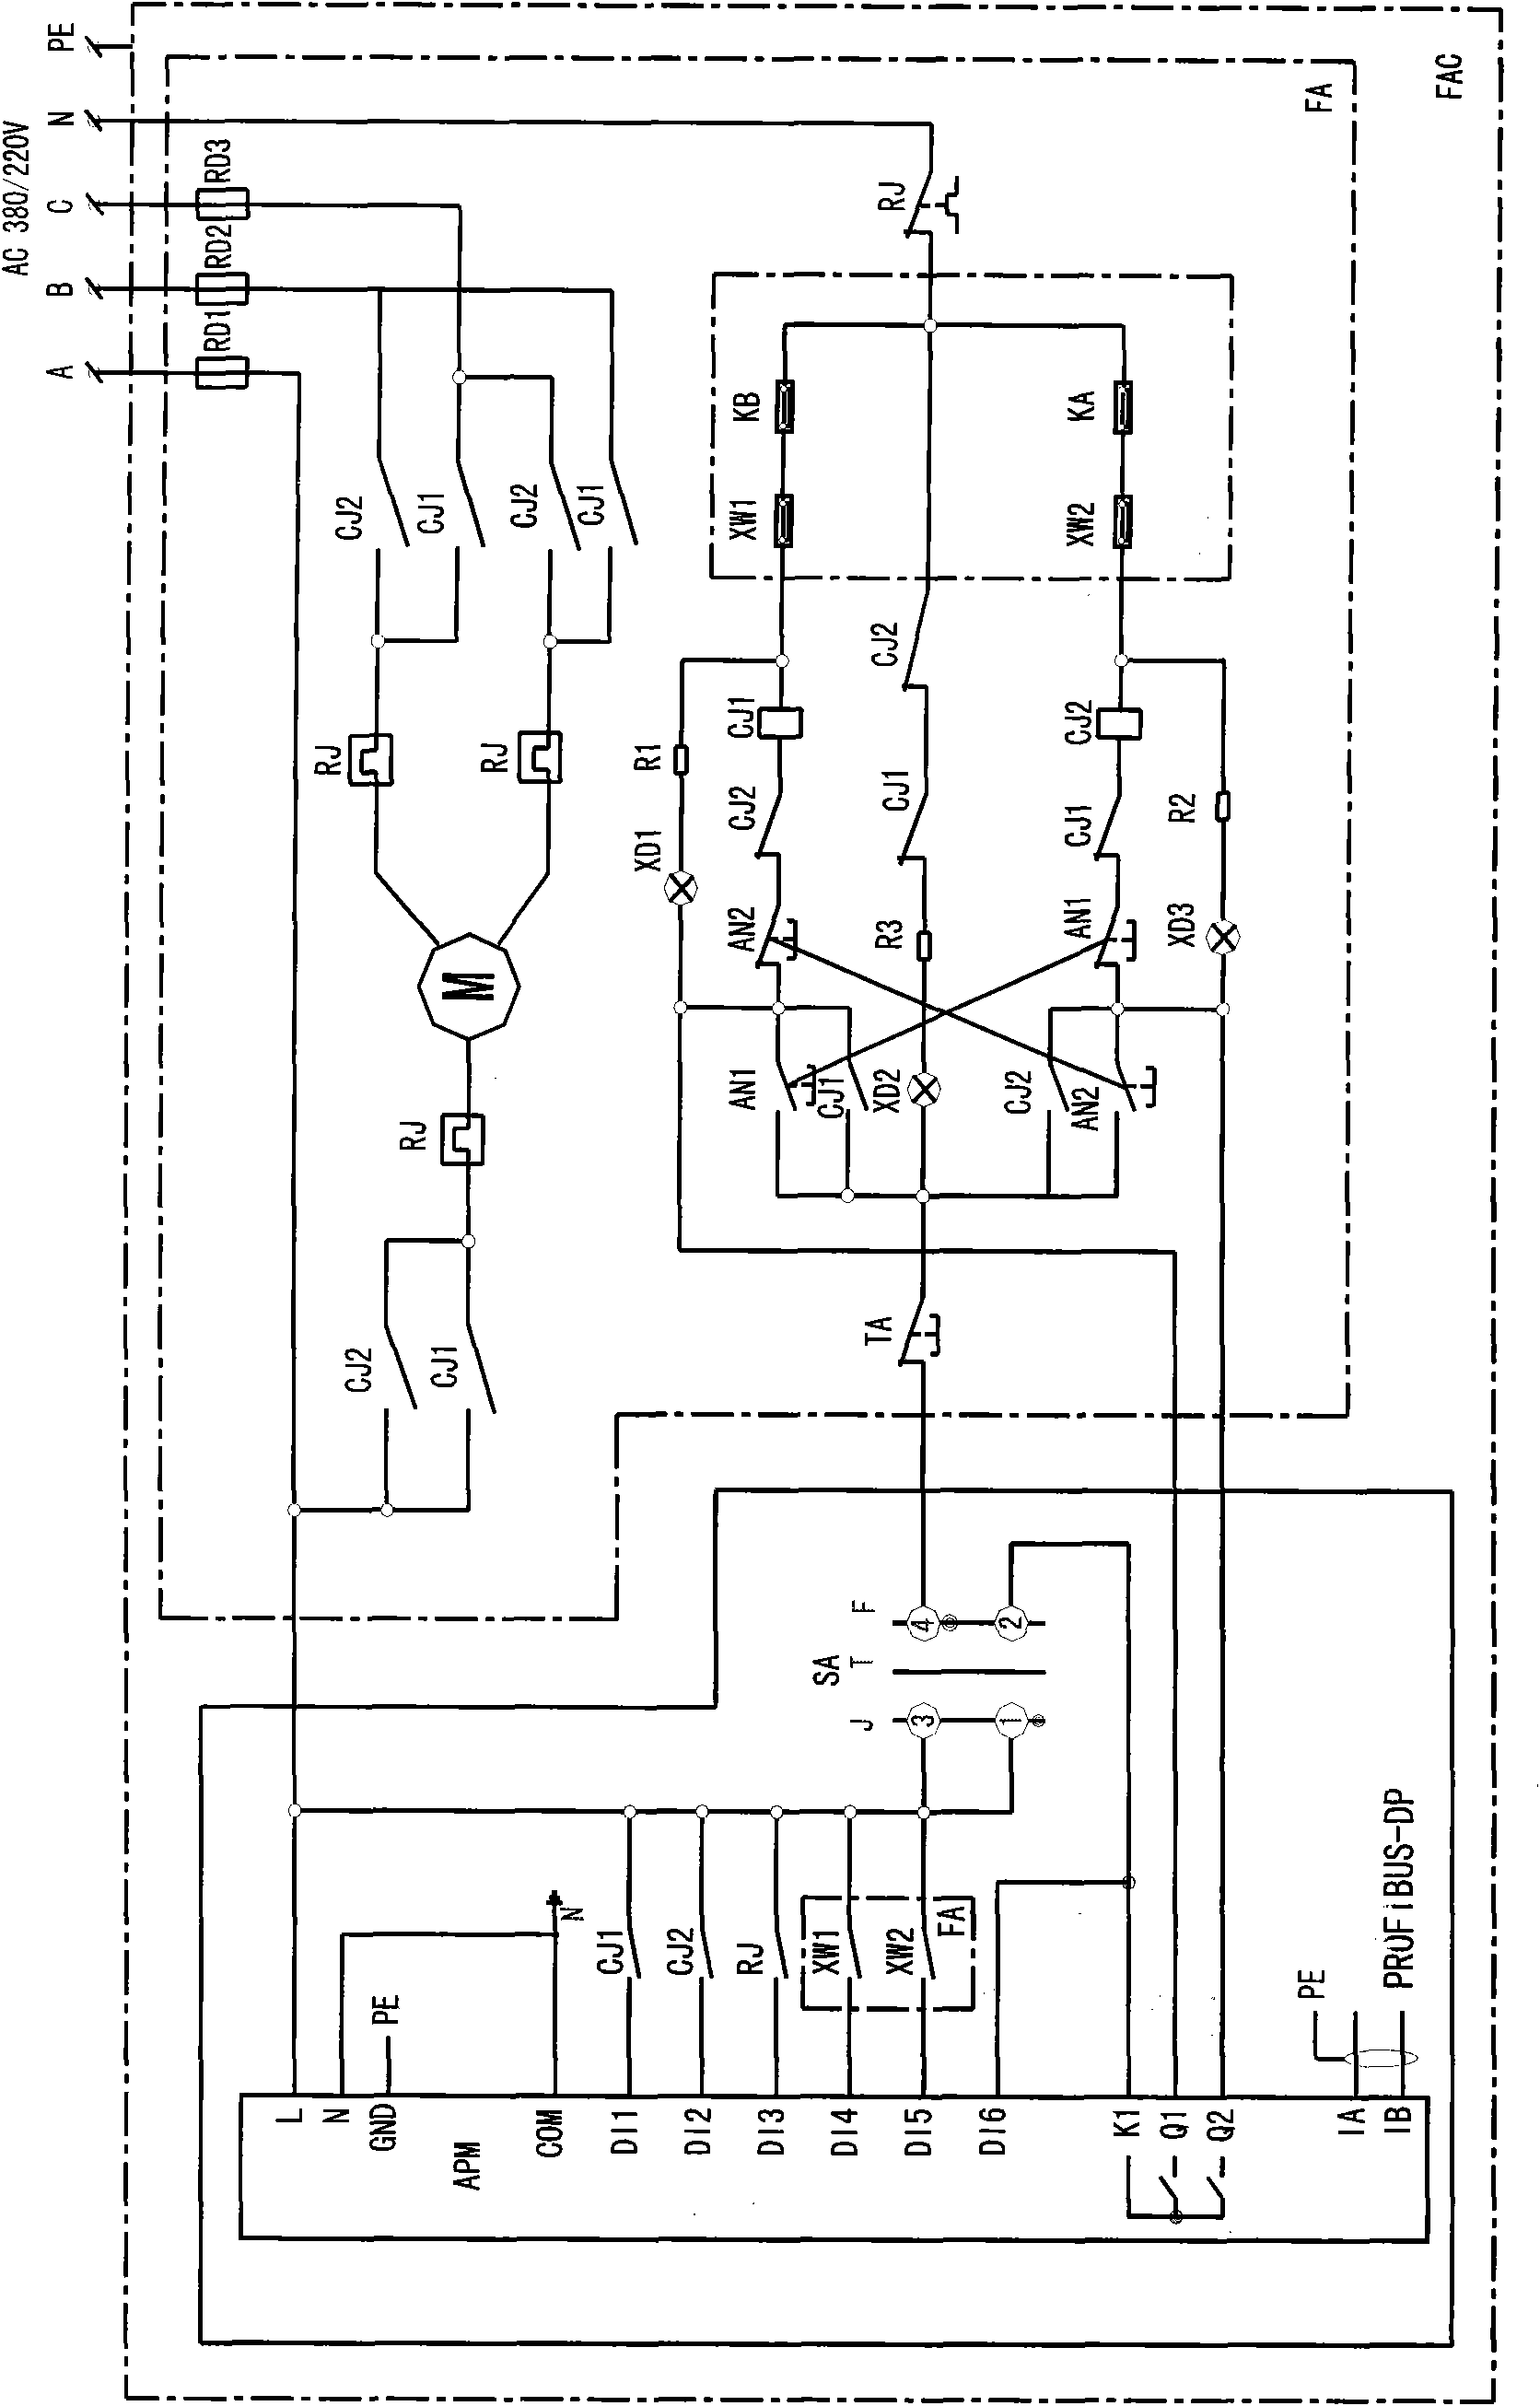 Electric valve control device capable of realizing intelligent control